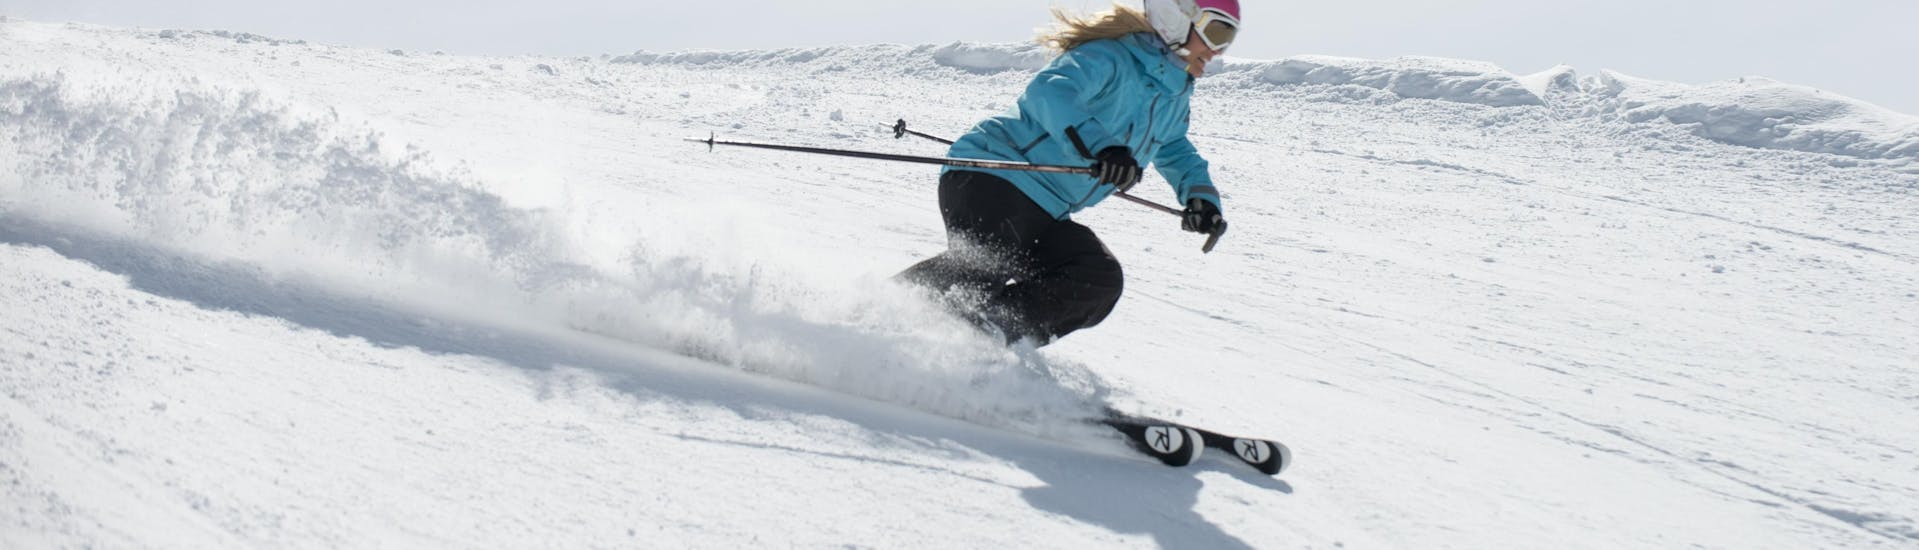 Private Off-Piste Skiing Lessons for All Levels with European Snowsport Verbier - Hero image